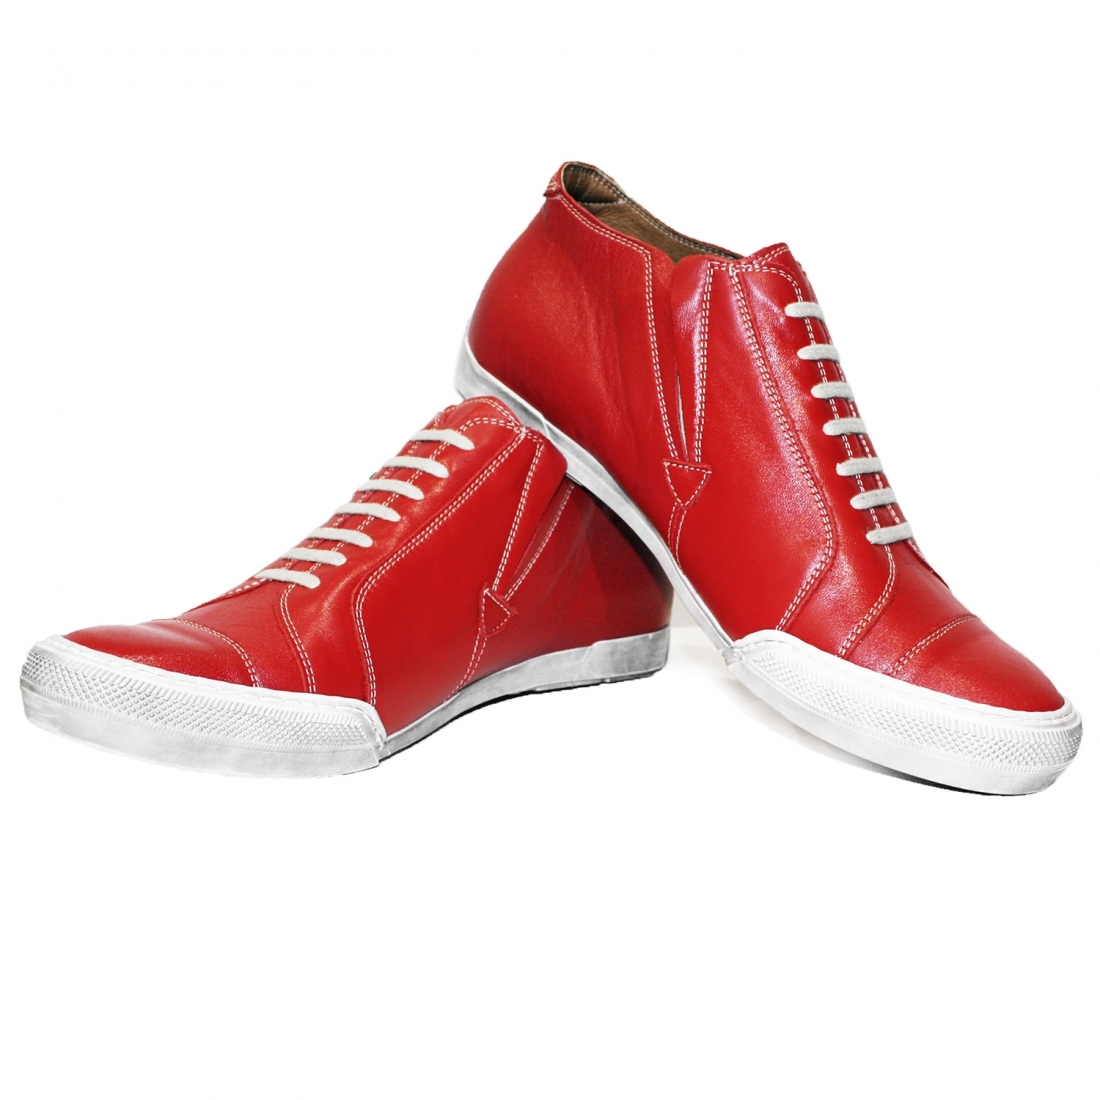 Modello Rednoise - Casual Shoes - Handmade Colorful Italian Leather Shoes